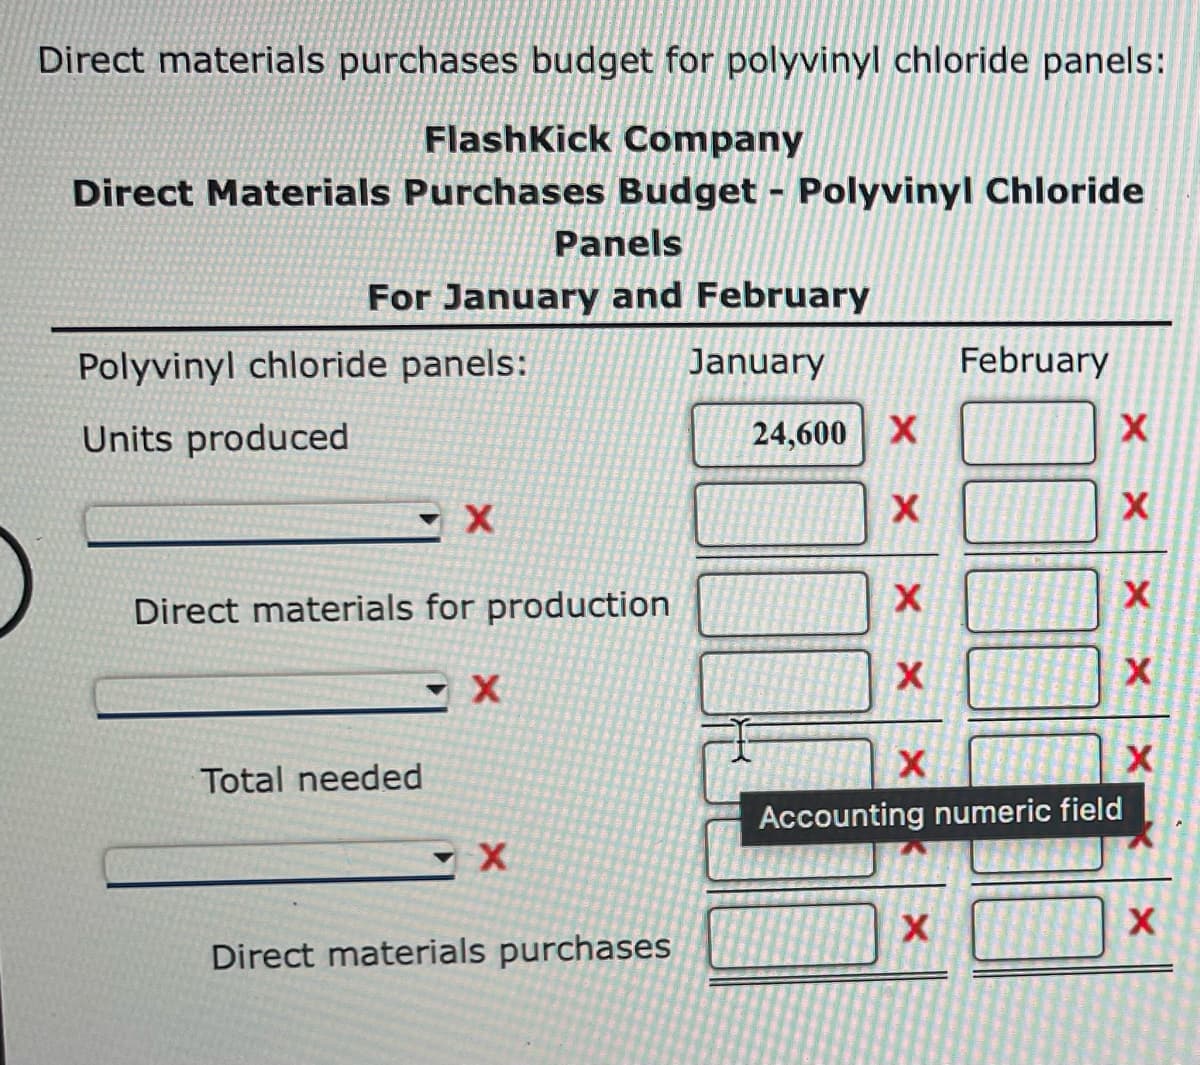 Direct materials purchases budget for polyvinyl chloride panels:
FlashKick Company
Direct Materials Purchases Budget - Polyvinyl Chloride
Panels
For January and February
Polyvinyl chloride panels:
January
February
Units produced
24,600 X
Direct materials for production
Total needed
Accounting numeric field
Direct materials purchases
X xx X
